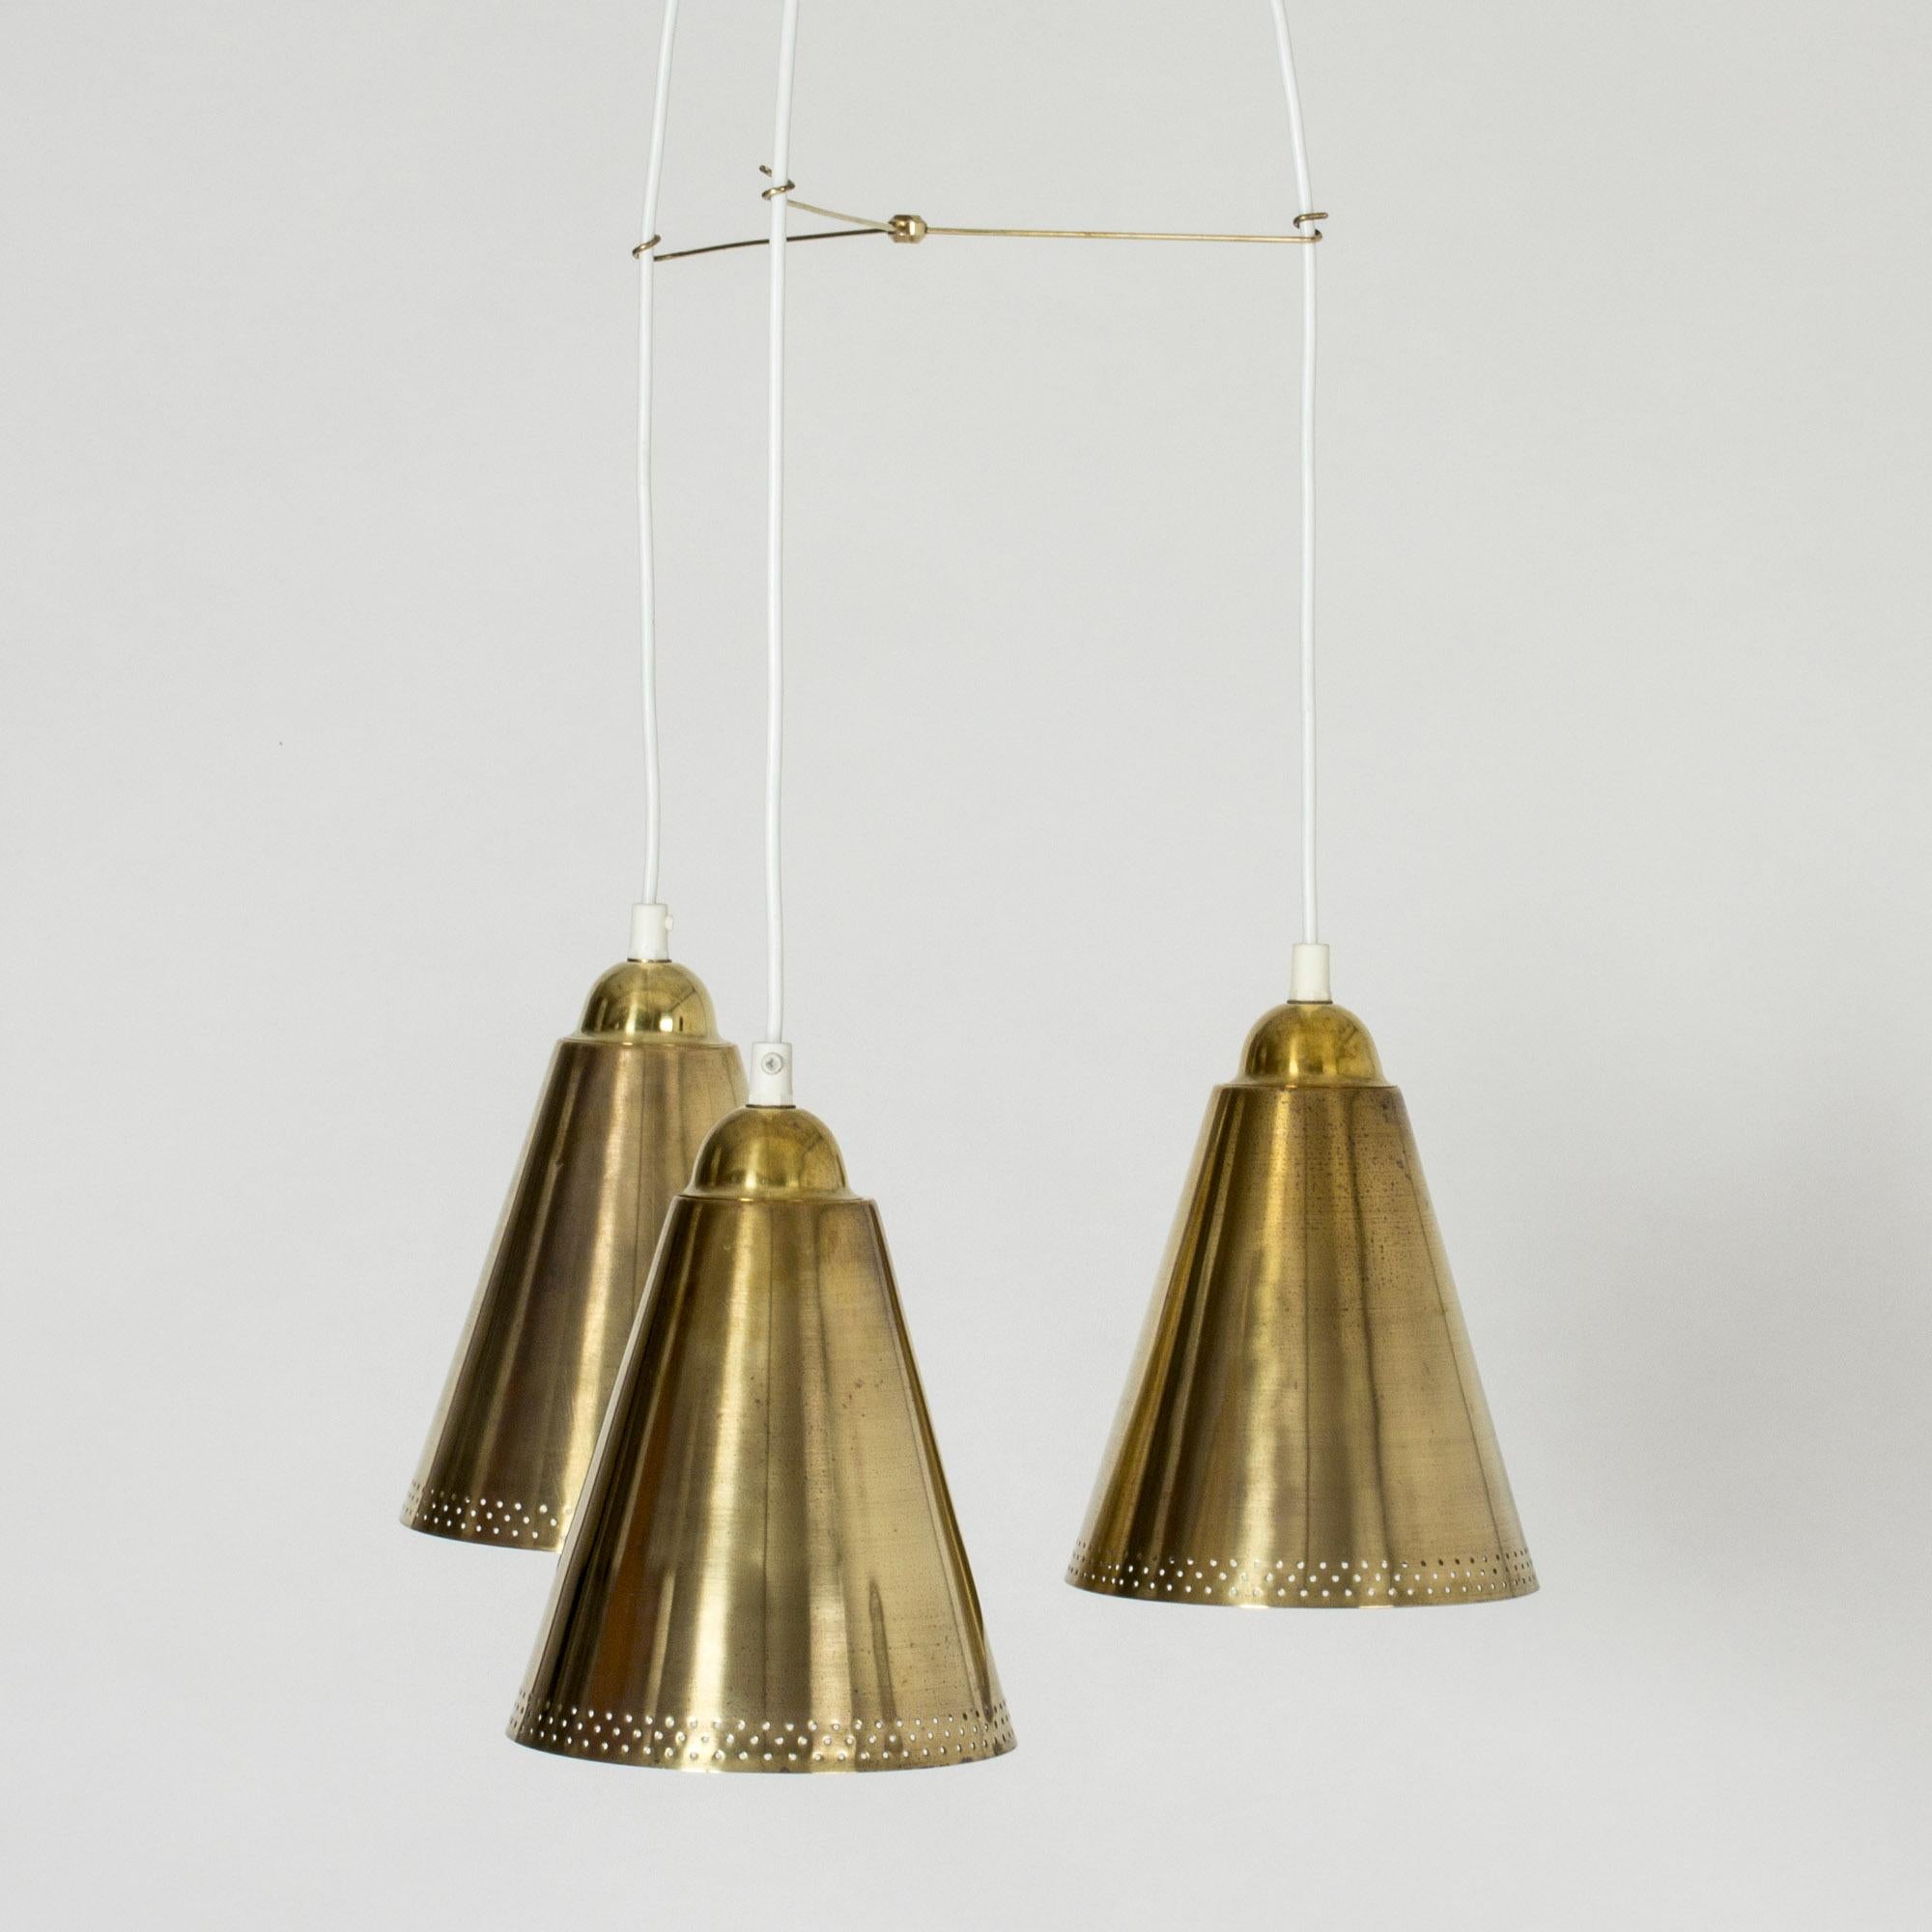 Beautiful brass pendant lamp with three shades, made in Sweden in the 1950s. The shades are perforated with small holes along the lower edges. The cords are separated by a slender brass arms that are connected in the middle. Very nicely made with